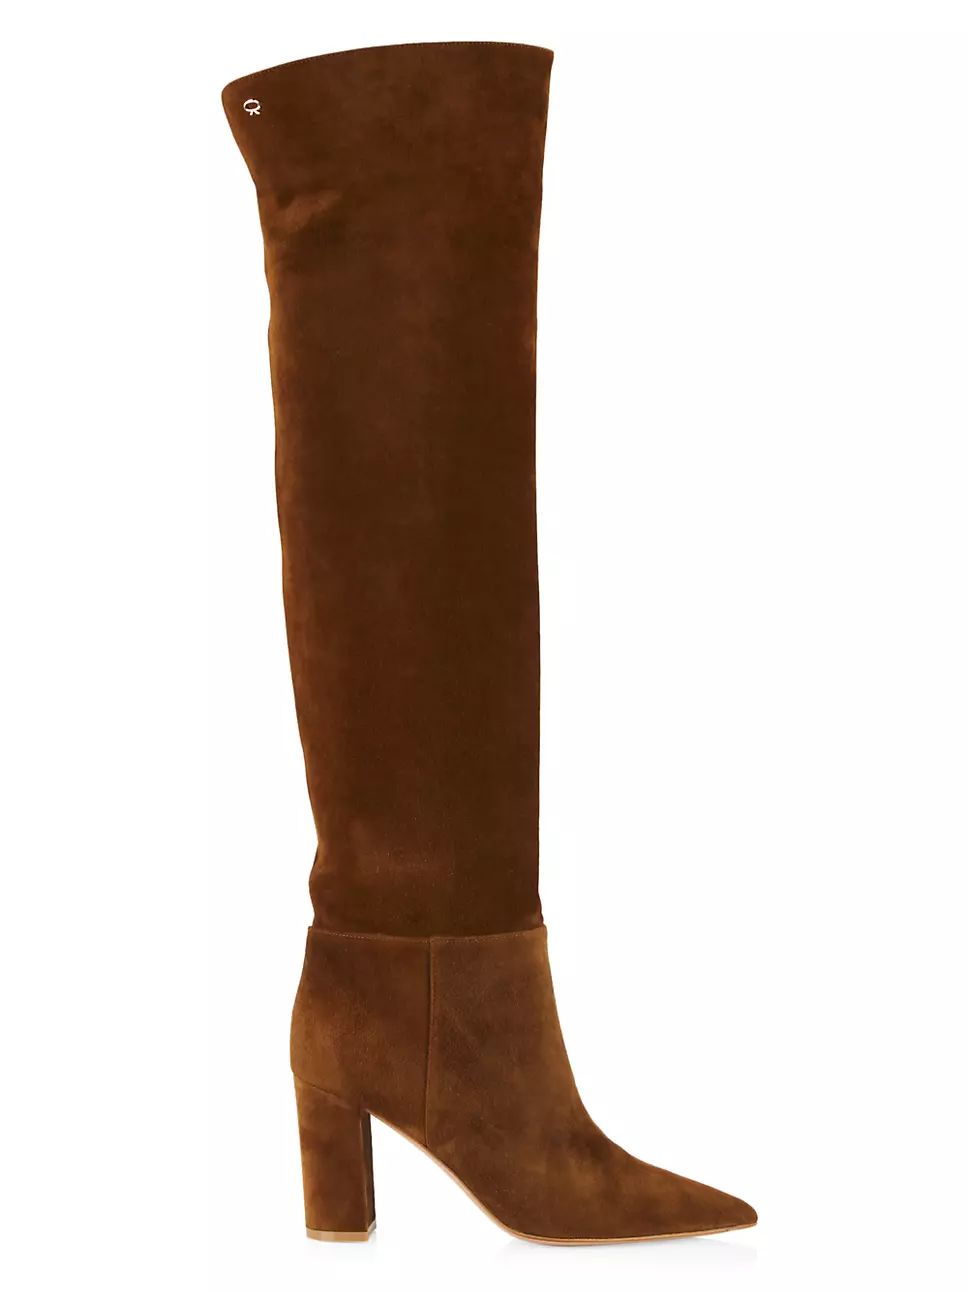 Gianvito Rossi Piper 85MM Suede Over-The-Knee Boots | Saks Fifth Avenue